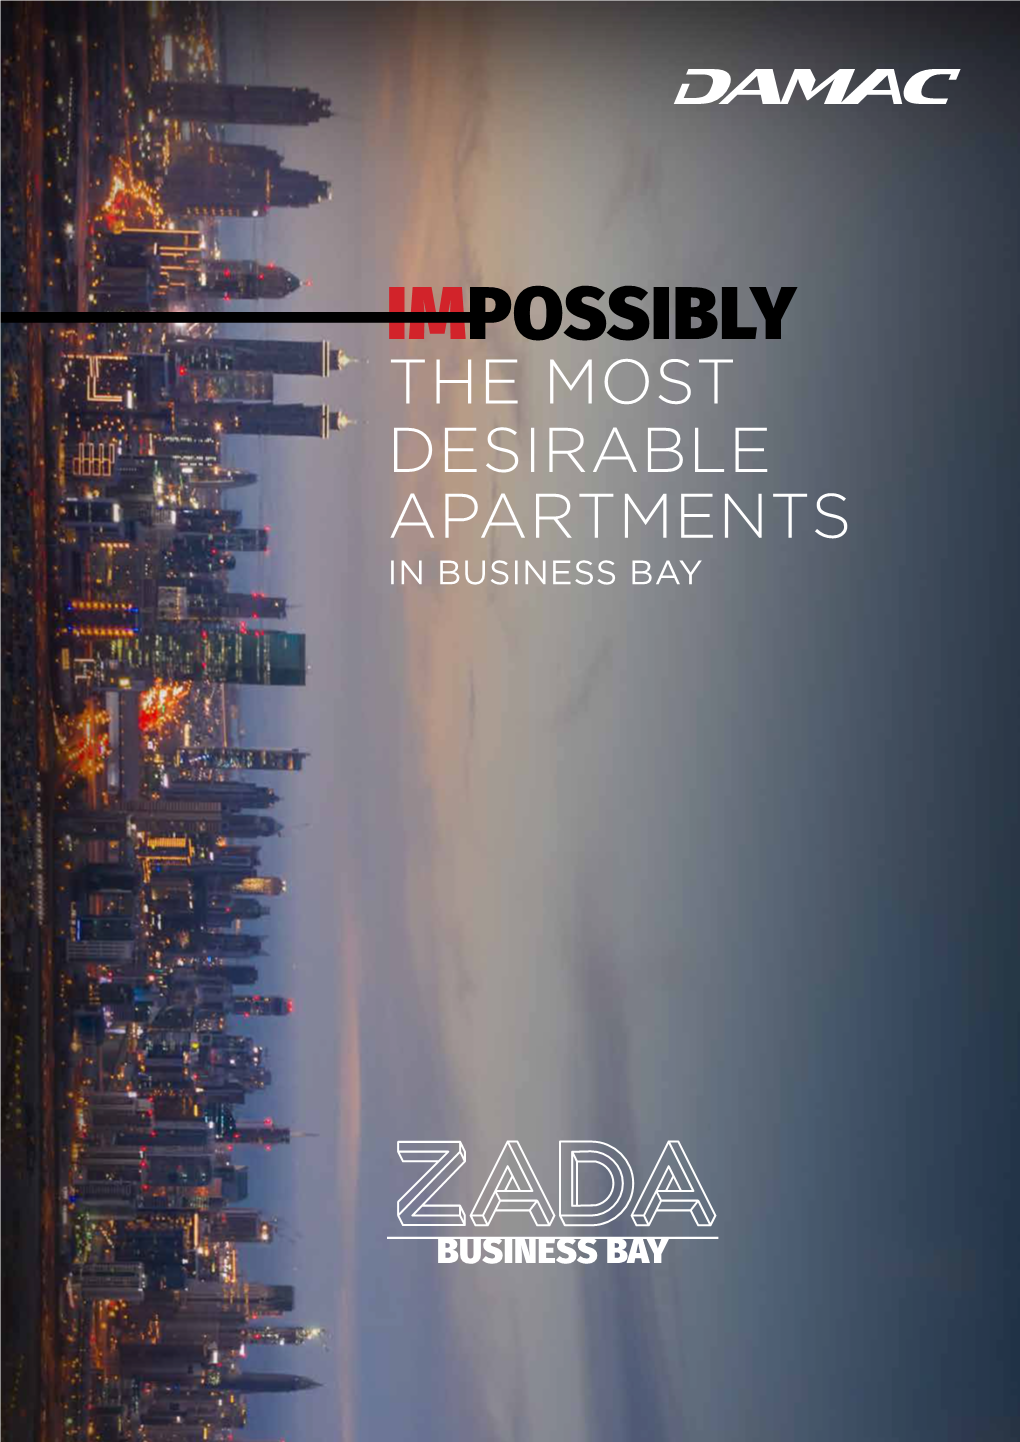 Impossibly the Most Desirable Apartments in Business Bay